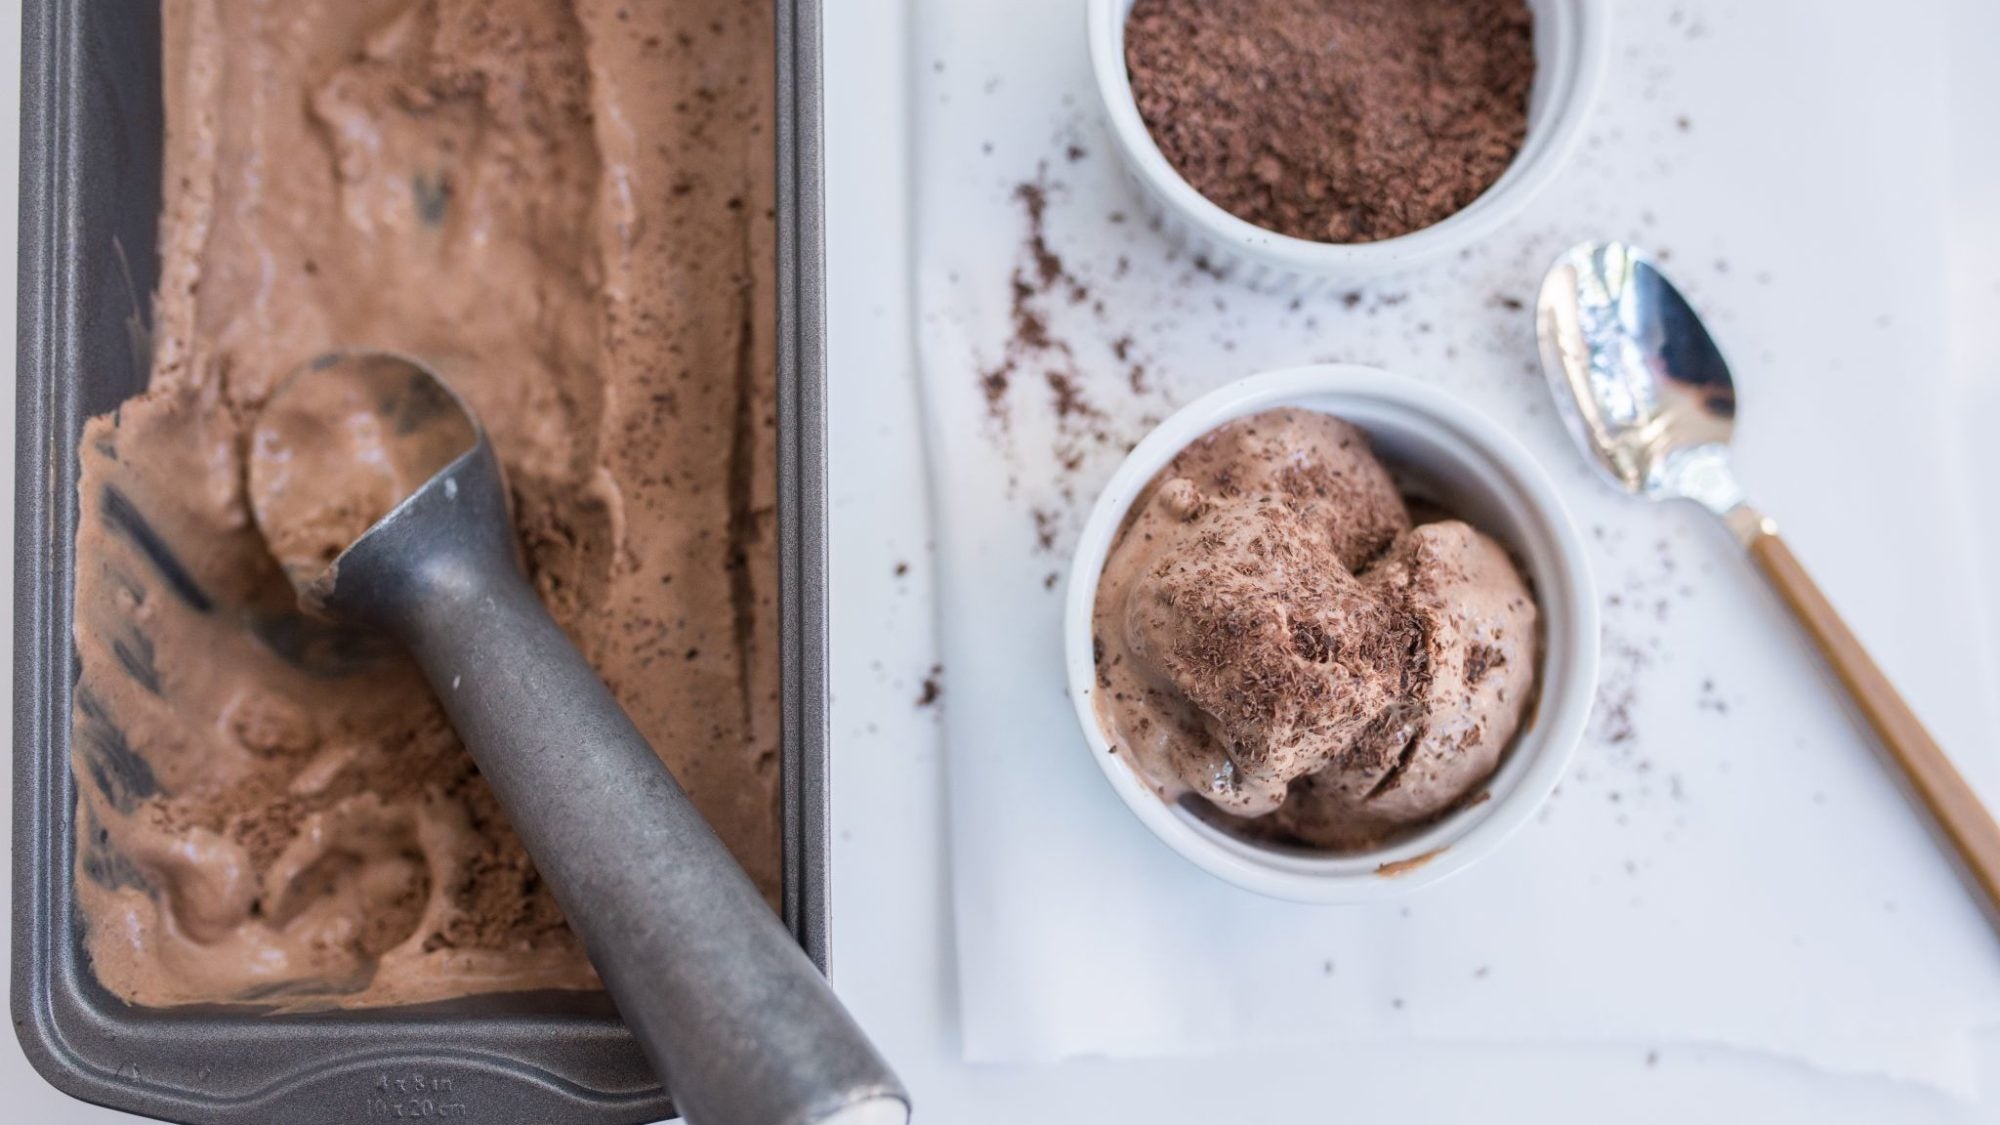 Keto Ice Cream Options Perfect for a Low-Carb Diet